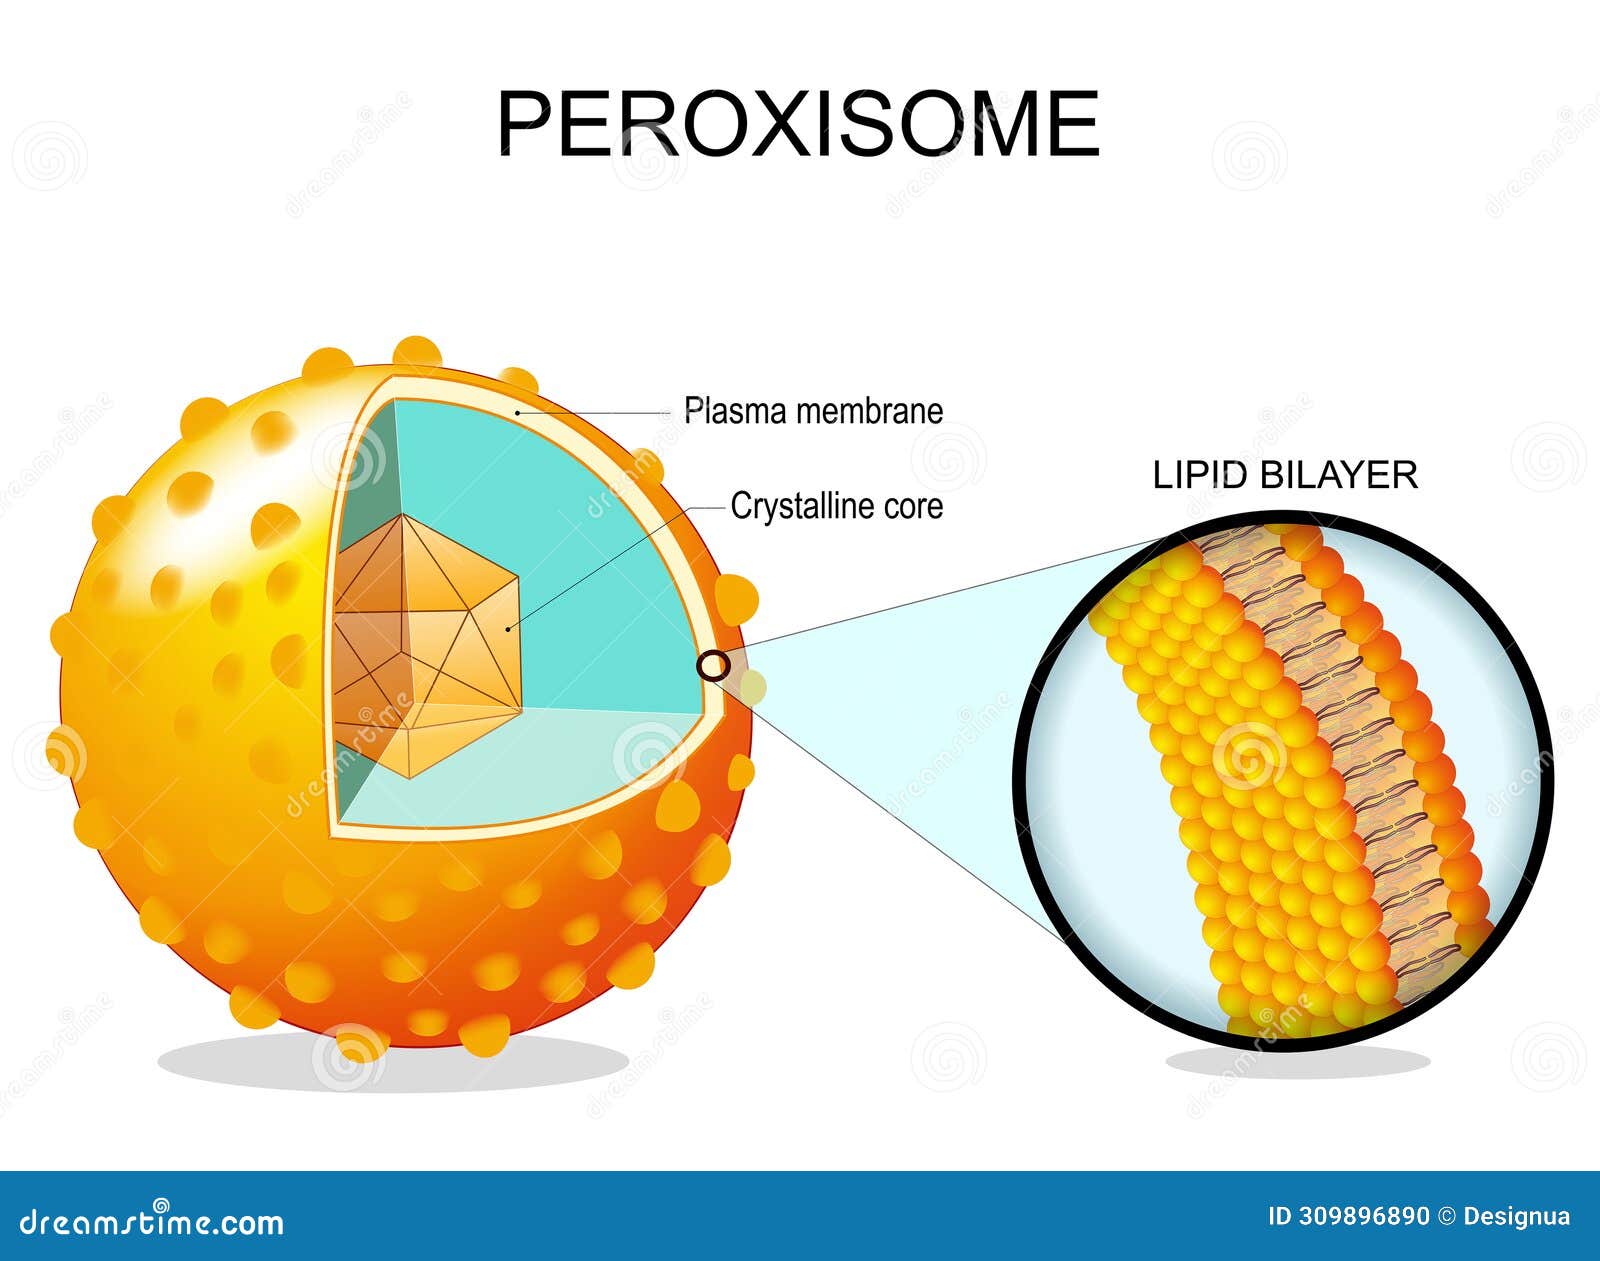 peroxisome anatomy. cross section of a cell organelle